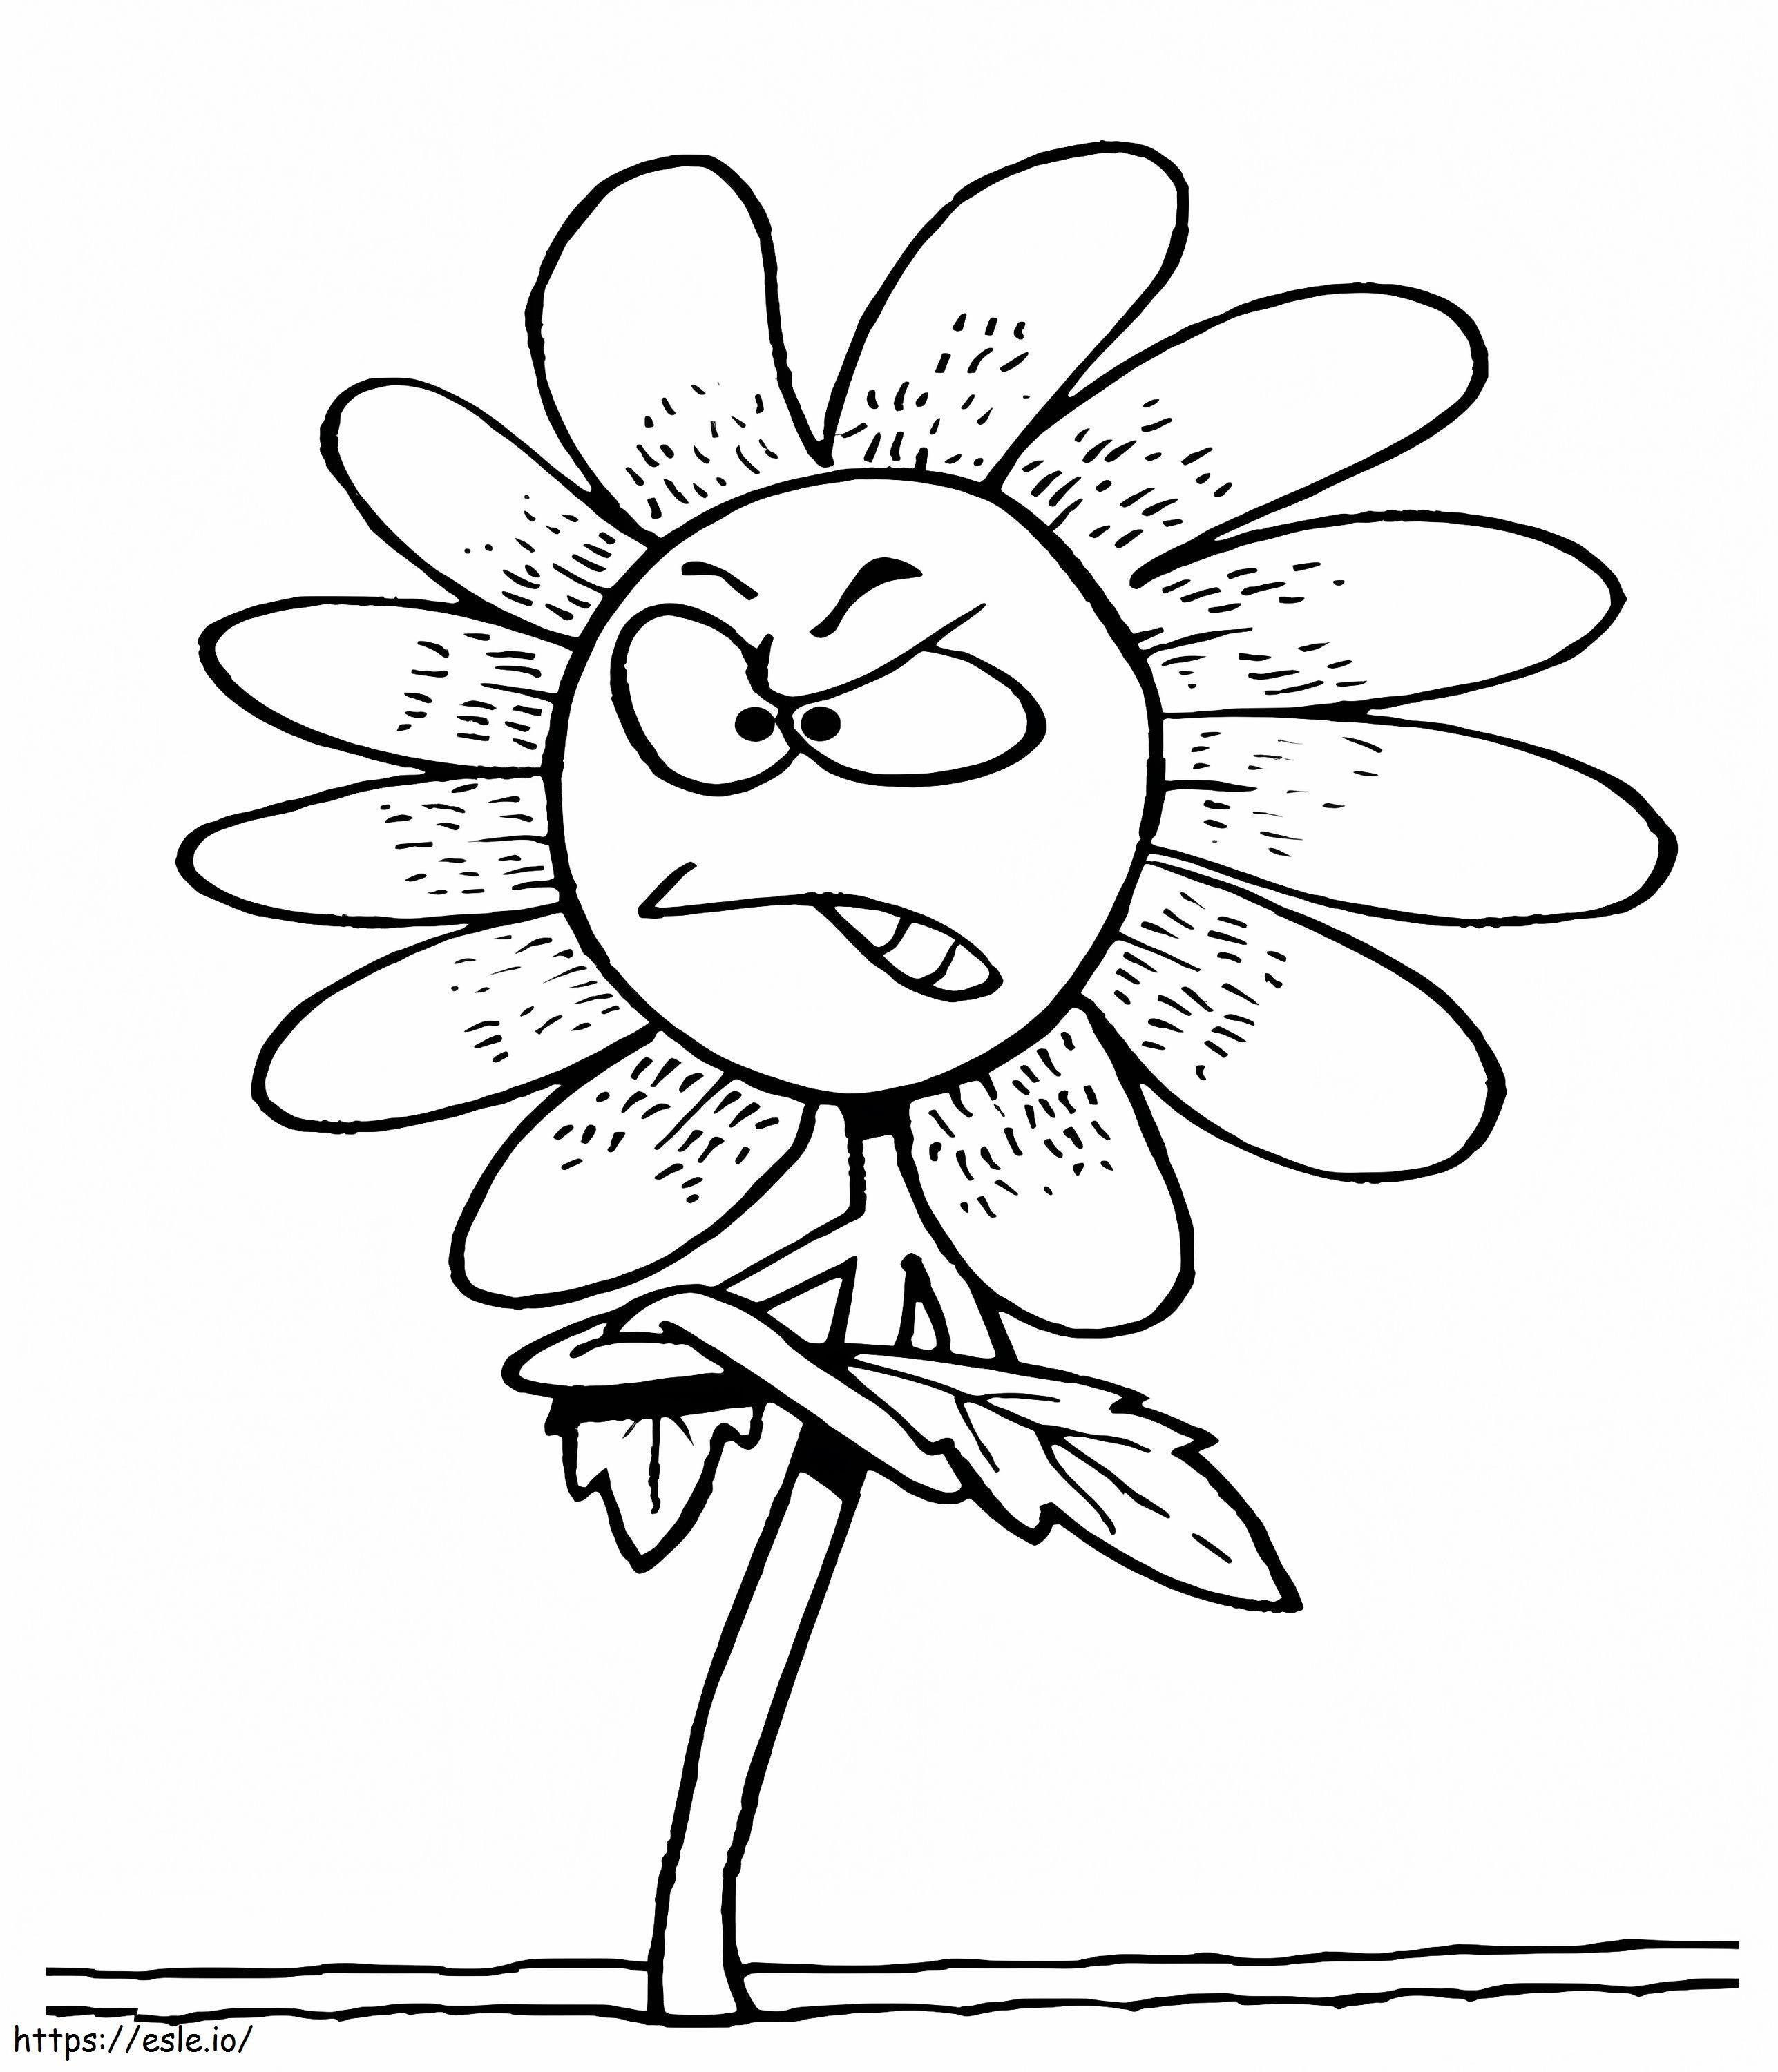 Angry Flower coloring page